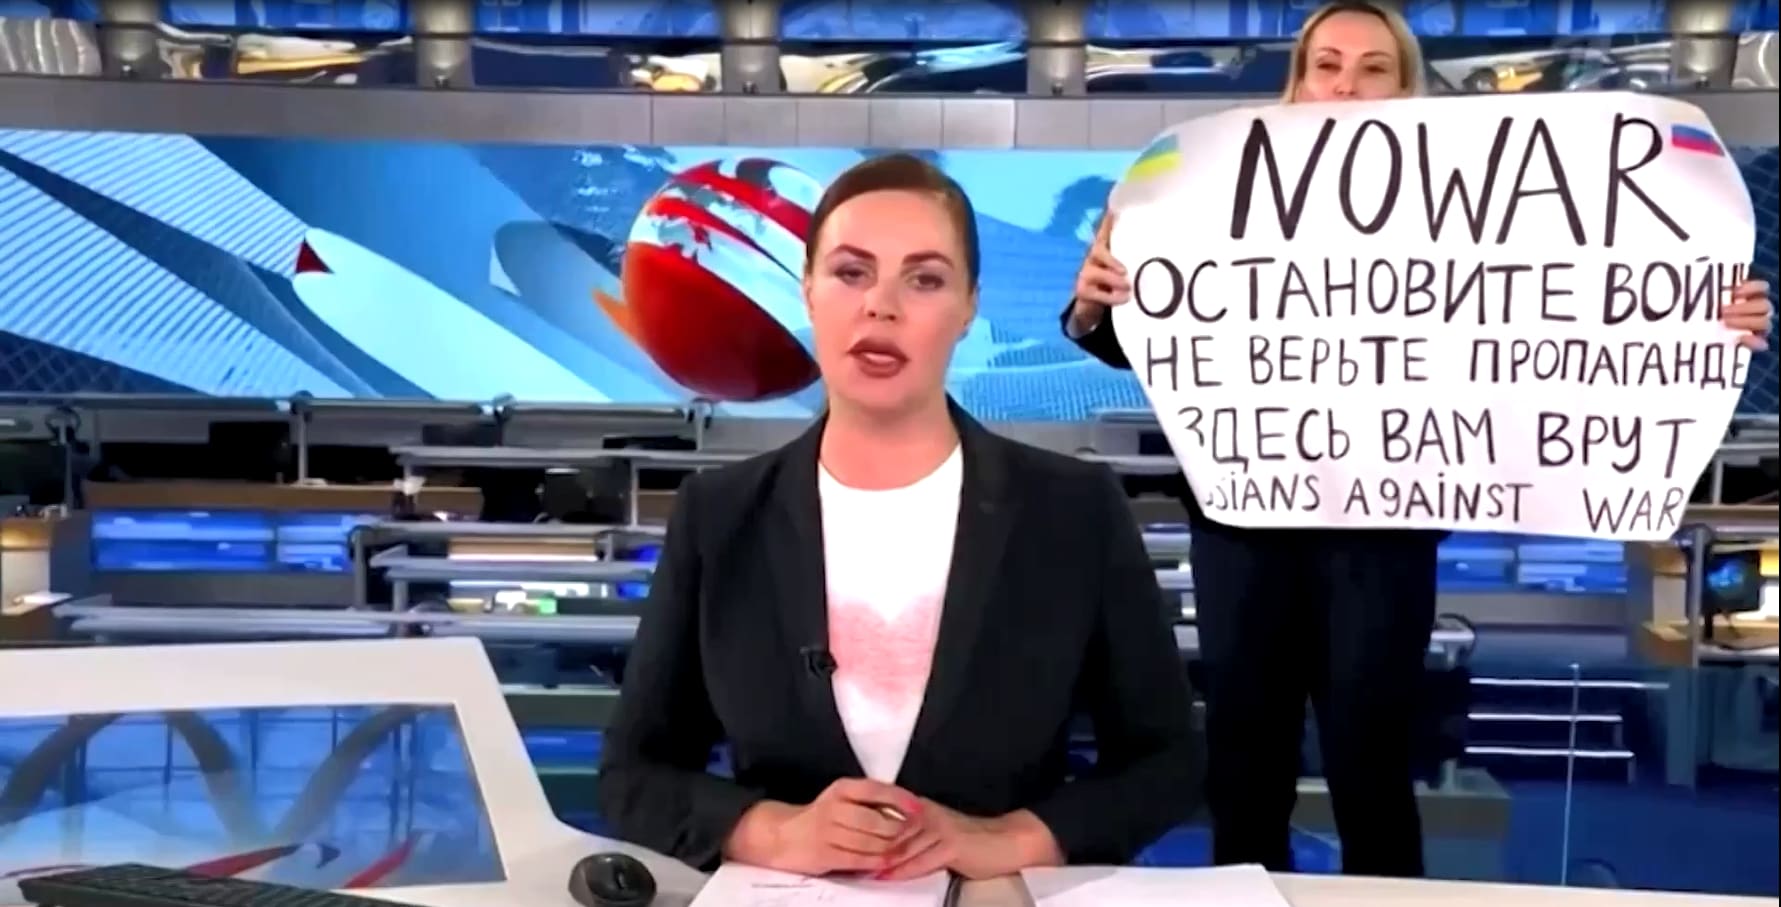 An anti-war protester interrupted a live news bulletin on Russia's state TV Channel One on Monday (March 14), holding up a sign behind the studio presenter and shouting slogans denouncing the war in Ukraine.